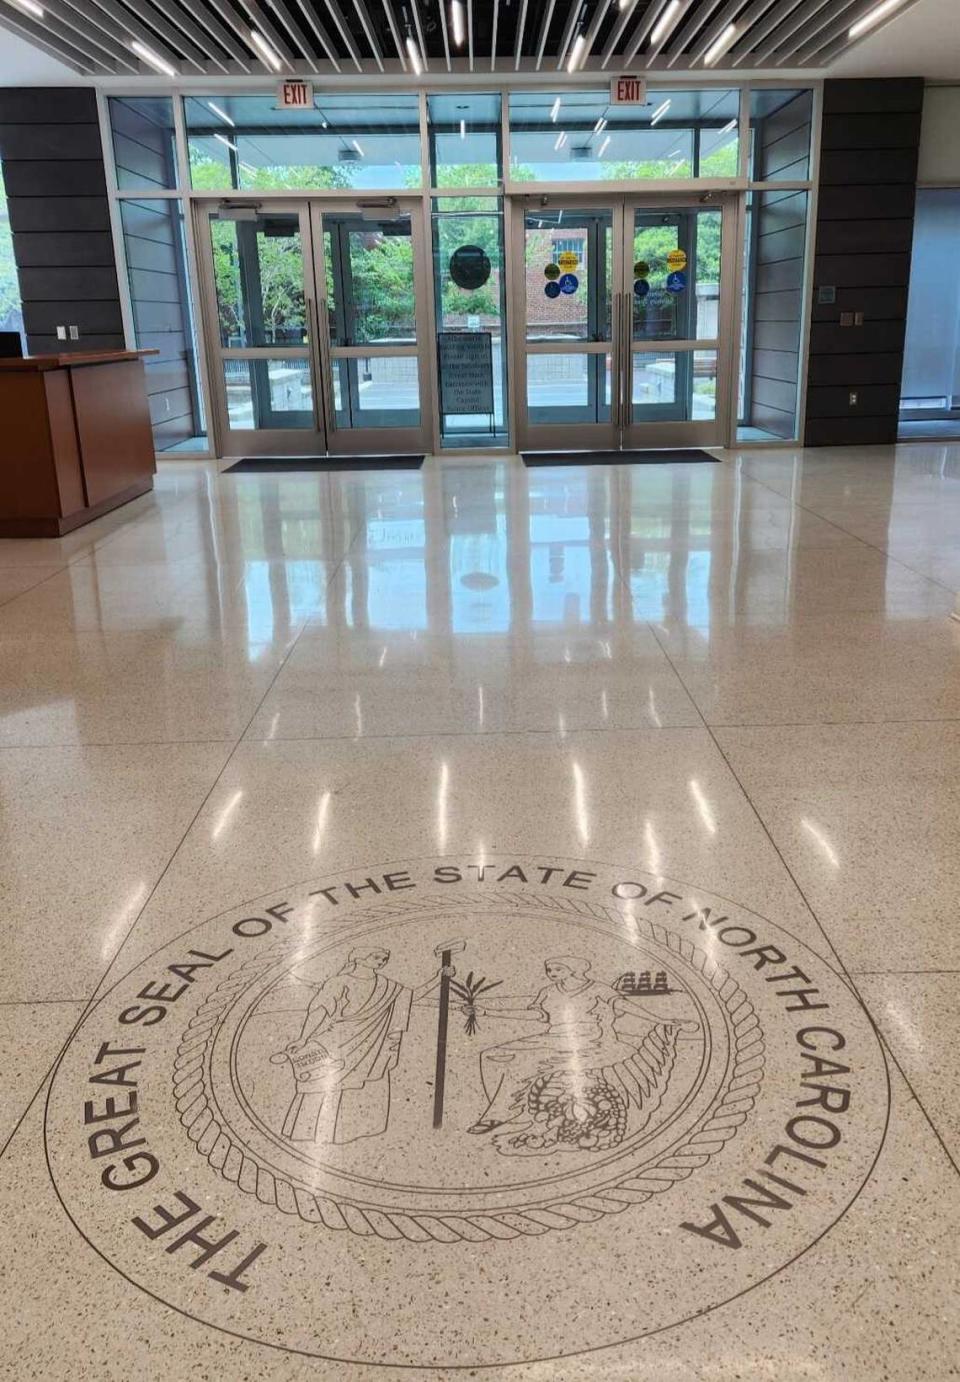 The North Carolina state seal is part of the floor of the Albemarle Building at 325 N. Salisbury St. in downtown Raleigh, which includes the offices for the governor.